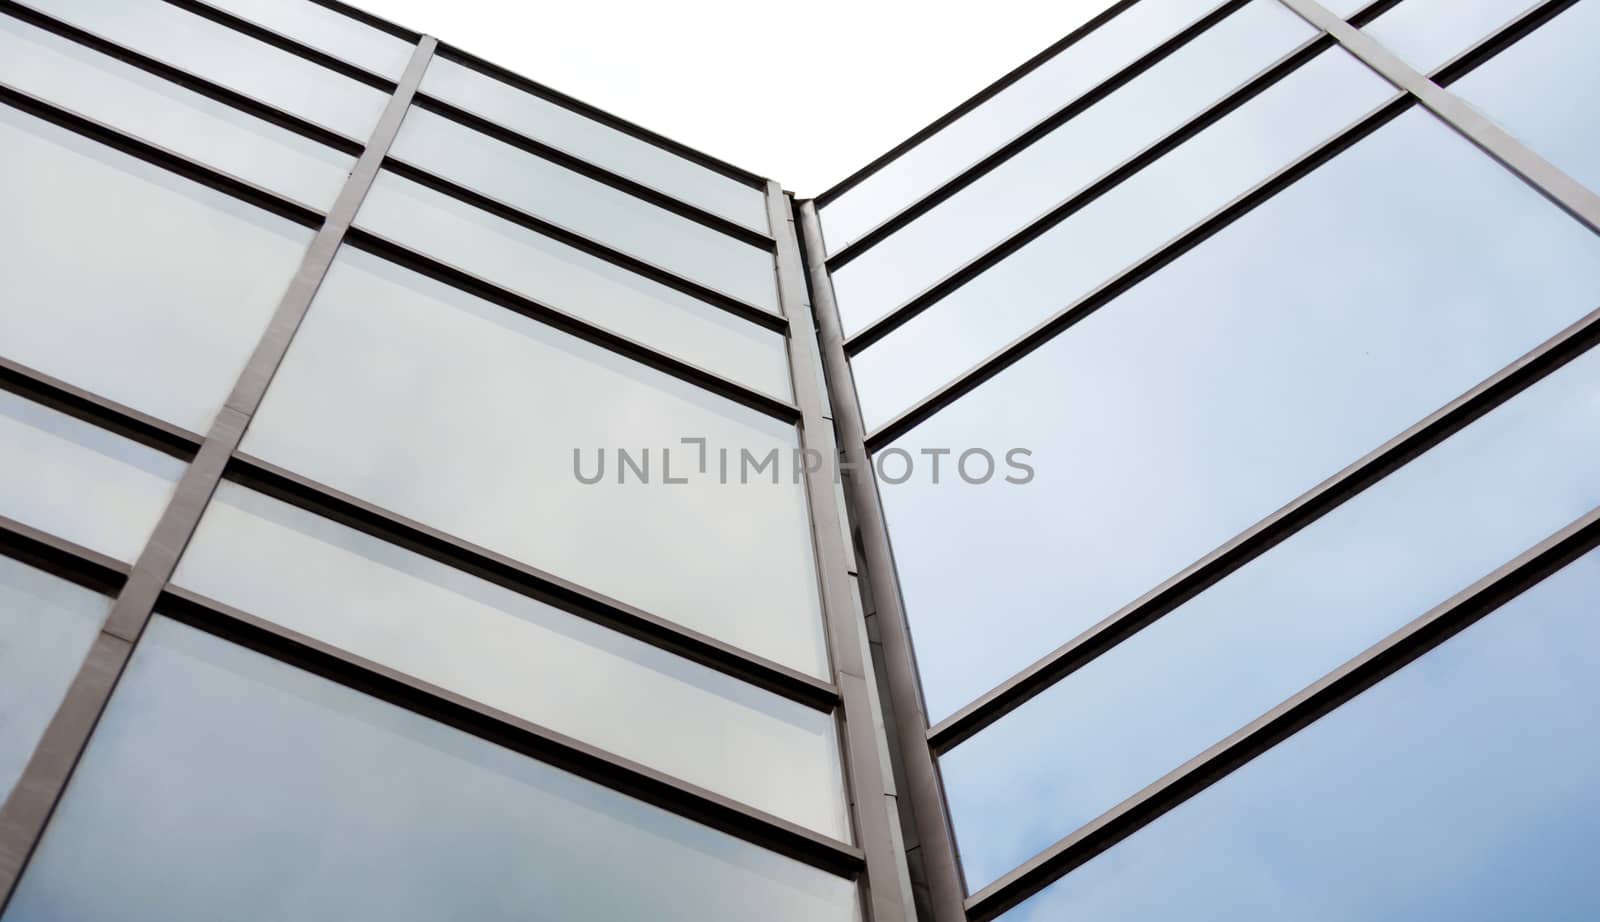 empty windows without people in a tall modern office building abstract architectural background